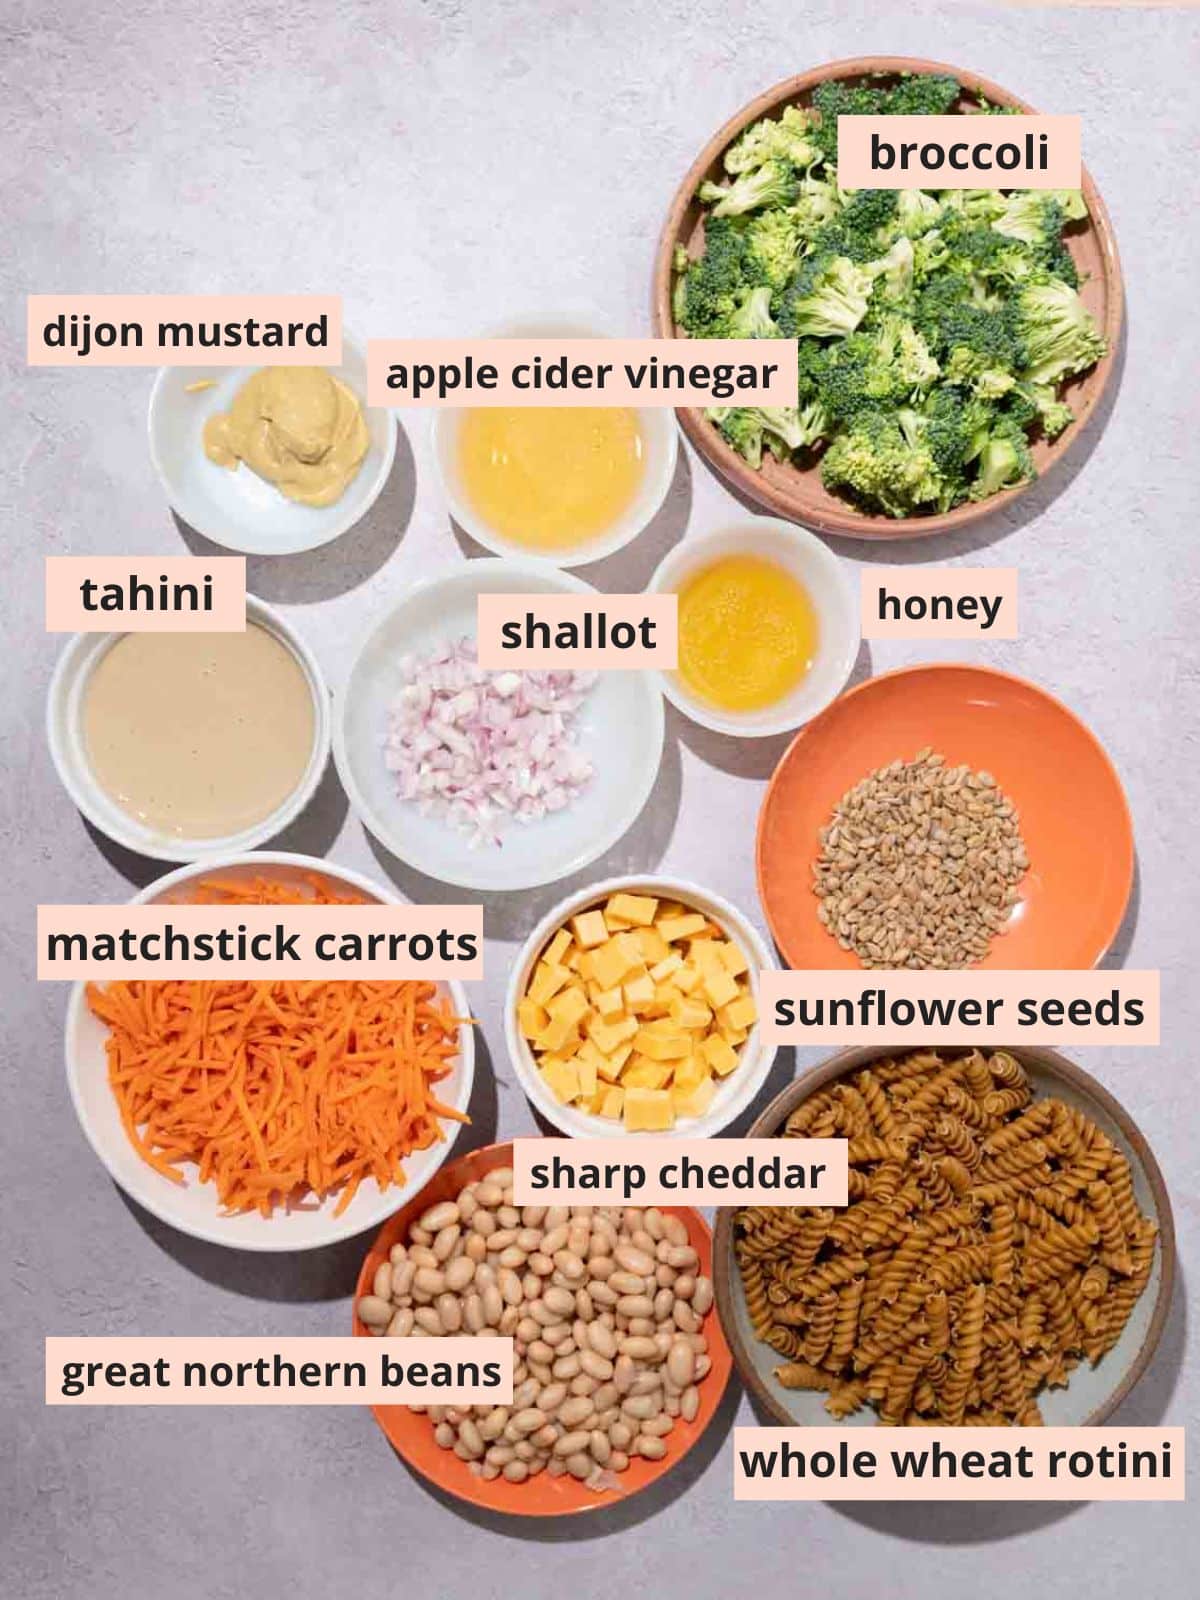 Labeled ingredients used to make the recipe.